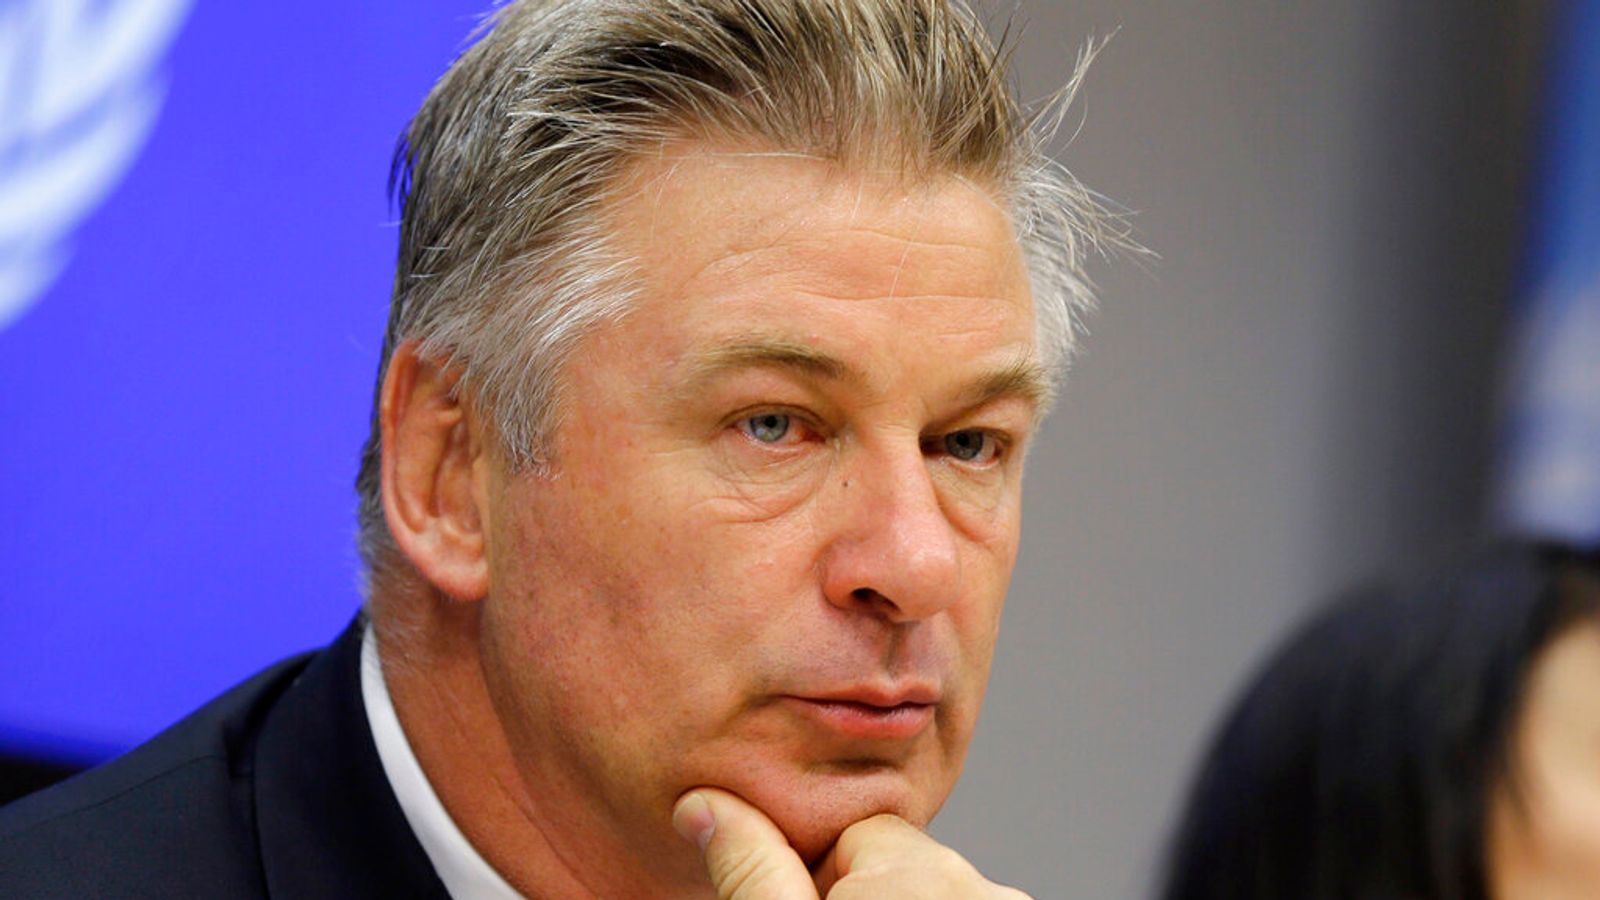 Alec Baldwin says he's 'grateful' for support as Rust filming continues